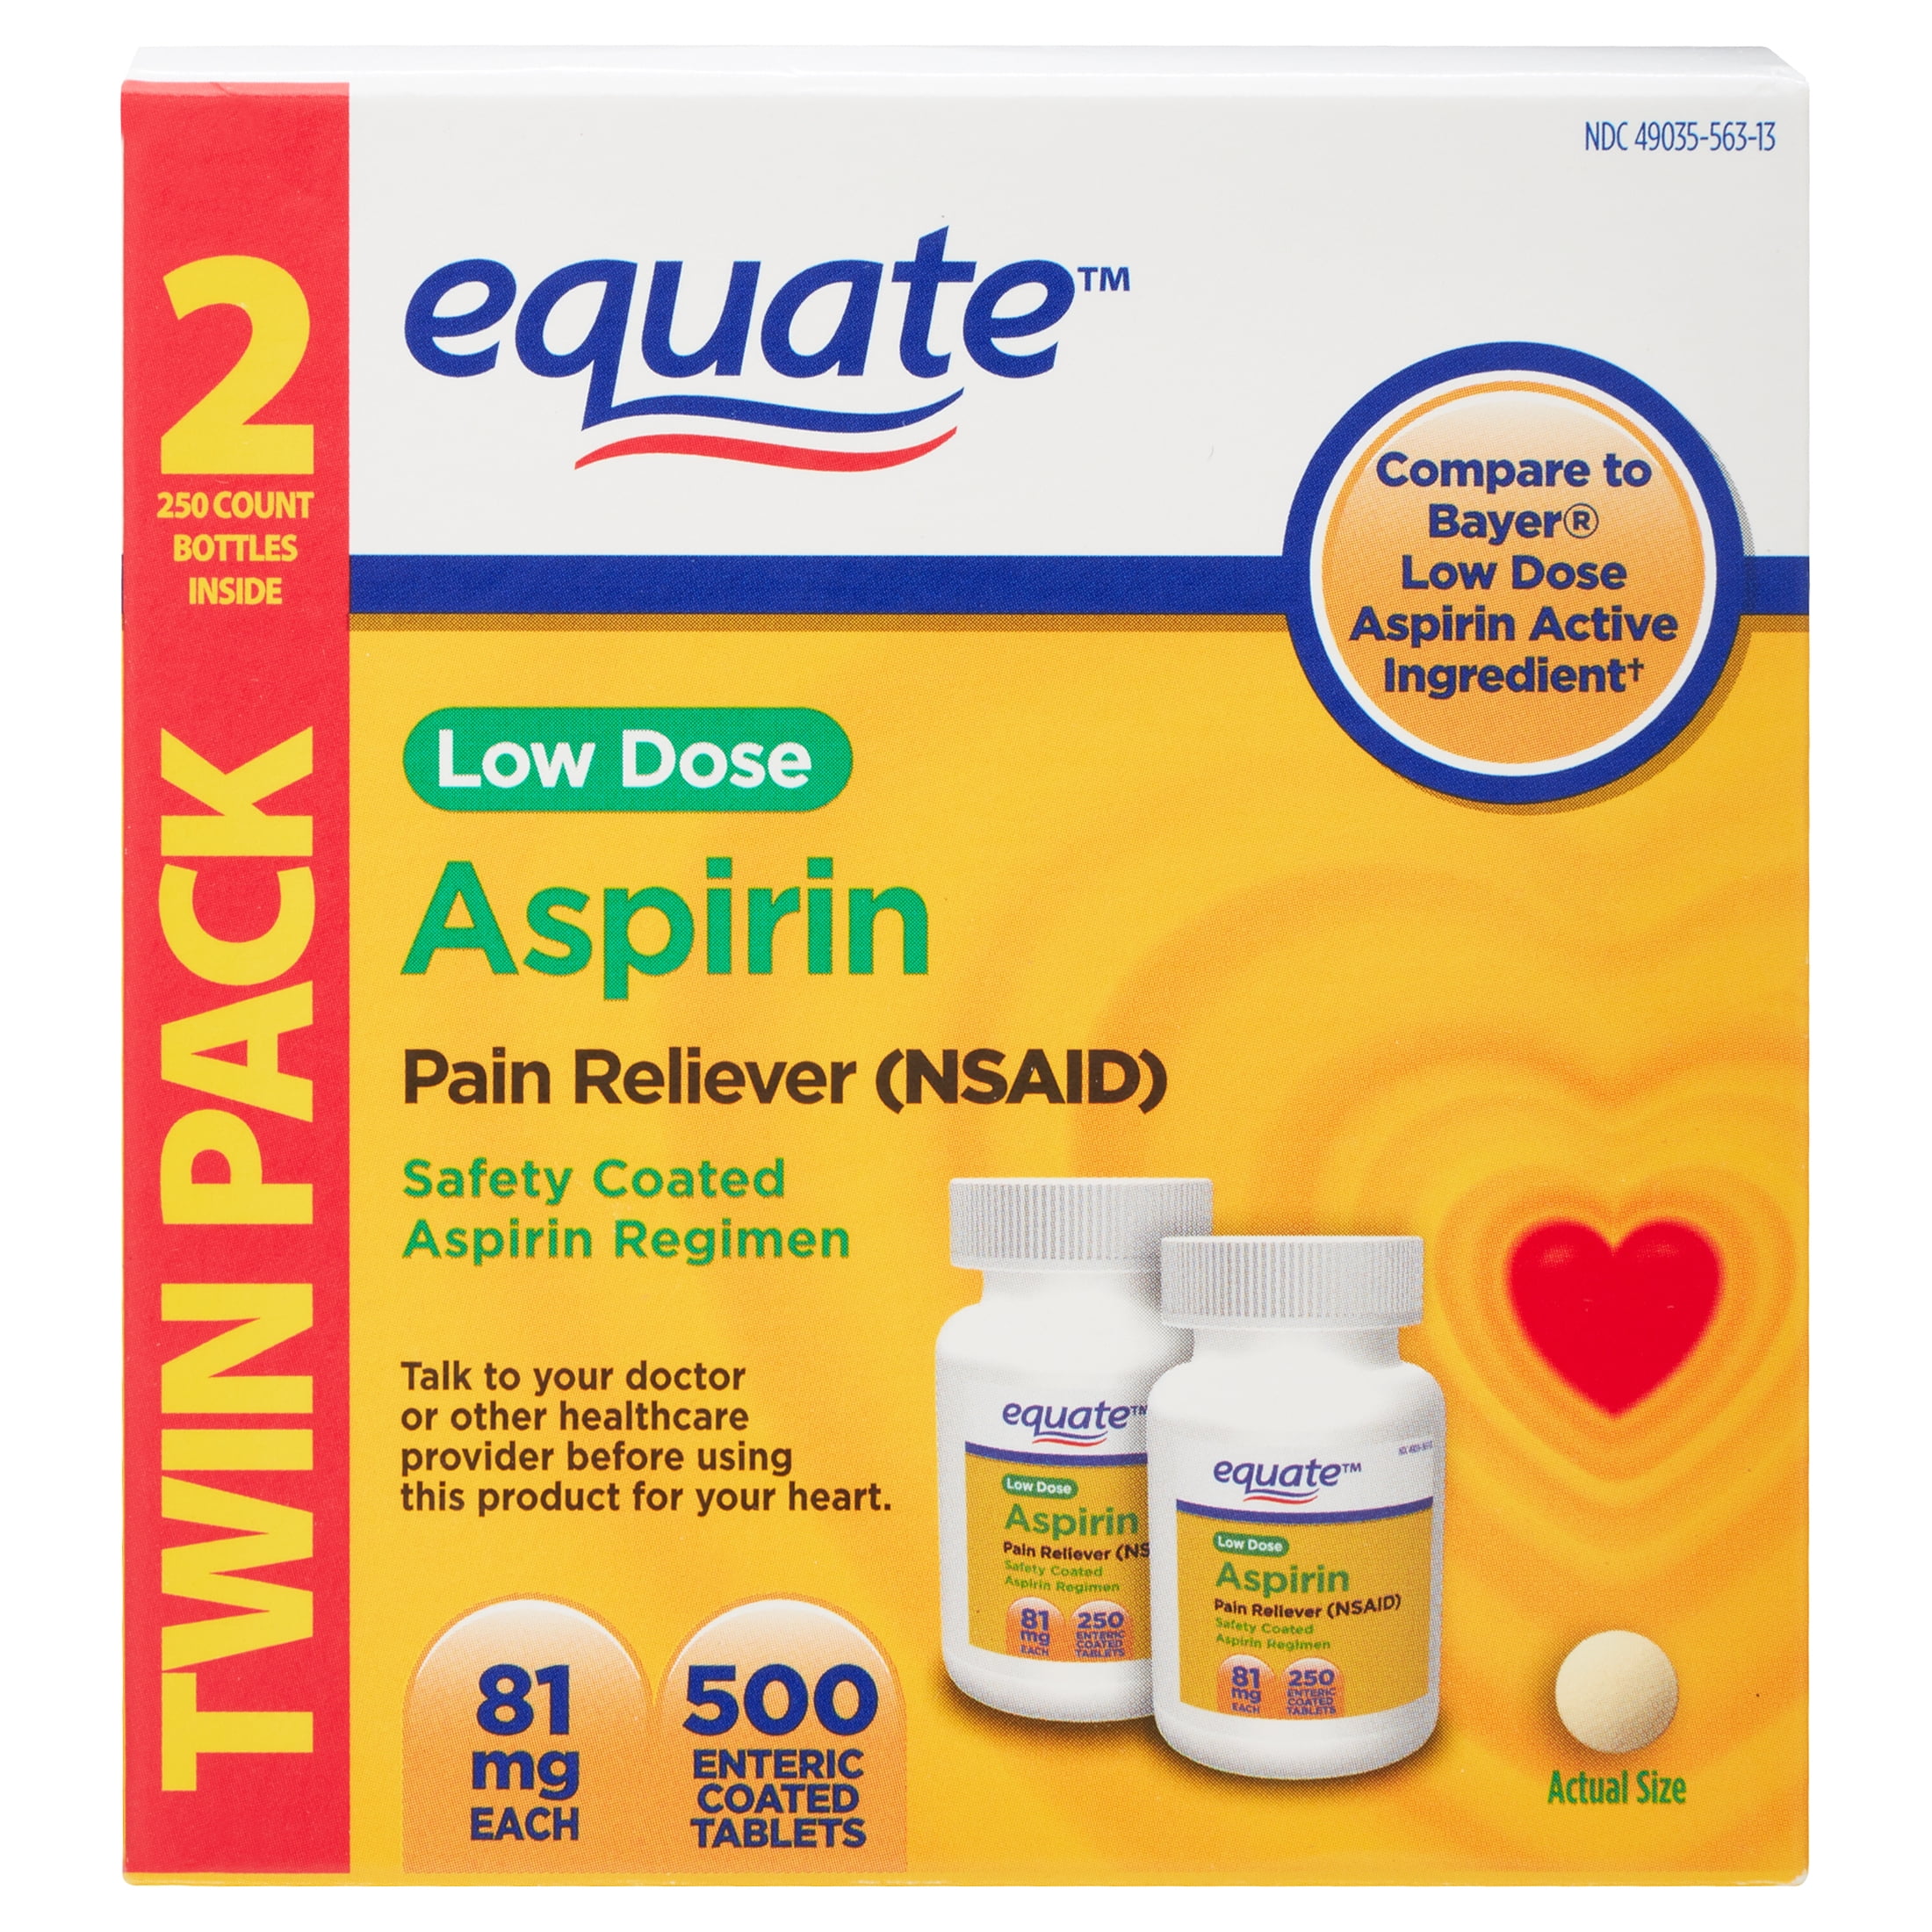 Equate Adult Low Dose Aspirin Safety Coated Tablets, 81 mg, 500 Count, 2 Pack